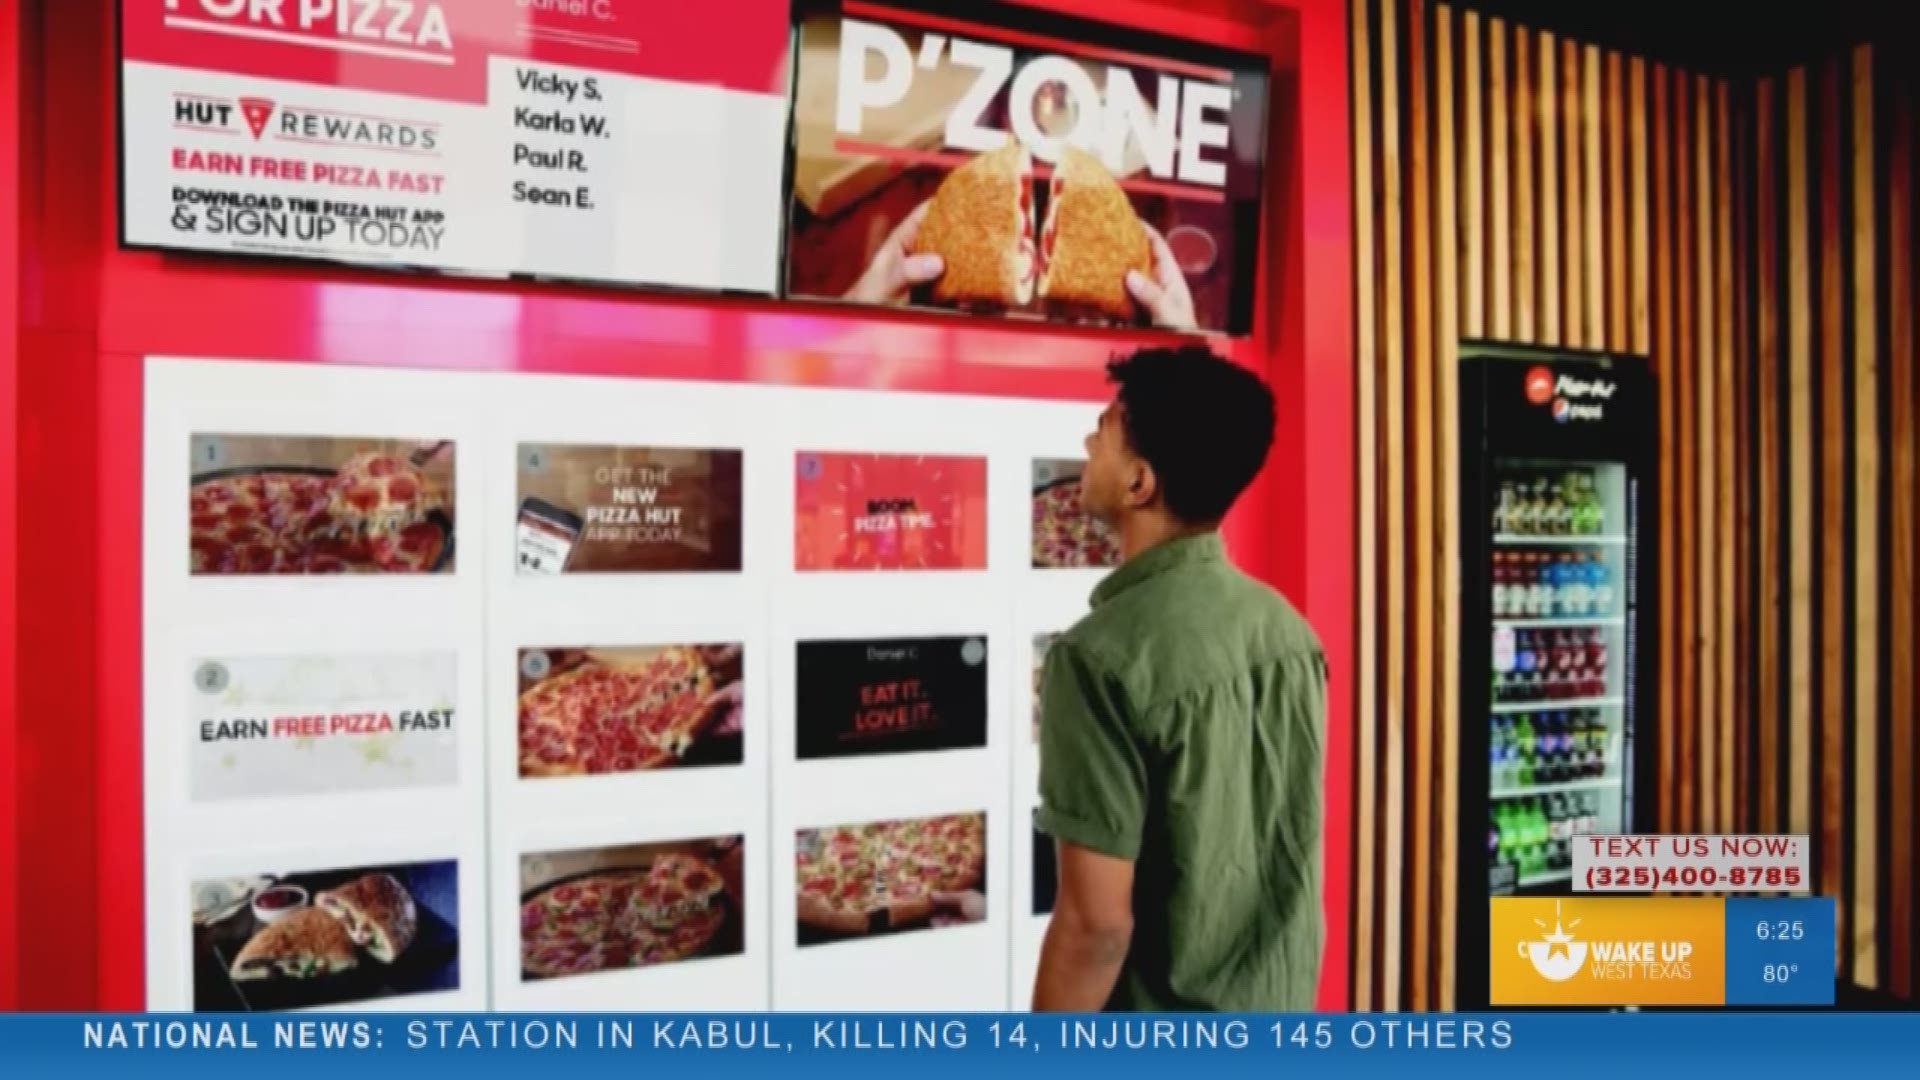 Our Malik Mingo shared what people said about Pizza Hut's announcement that they will be closing 500 dine-in restaurants to focus more on delivery.